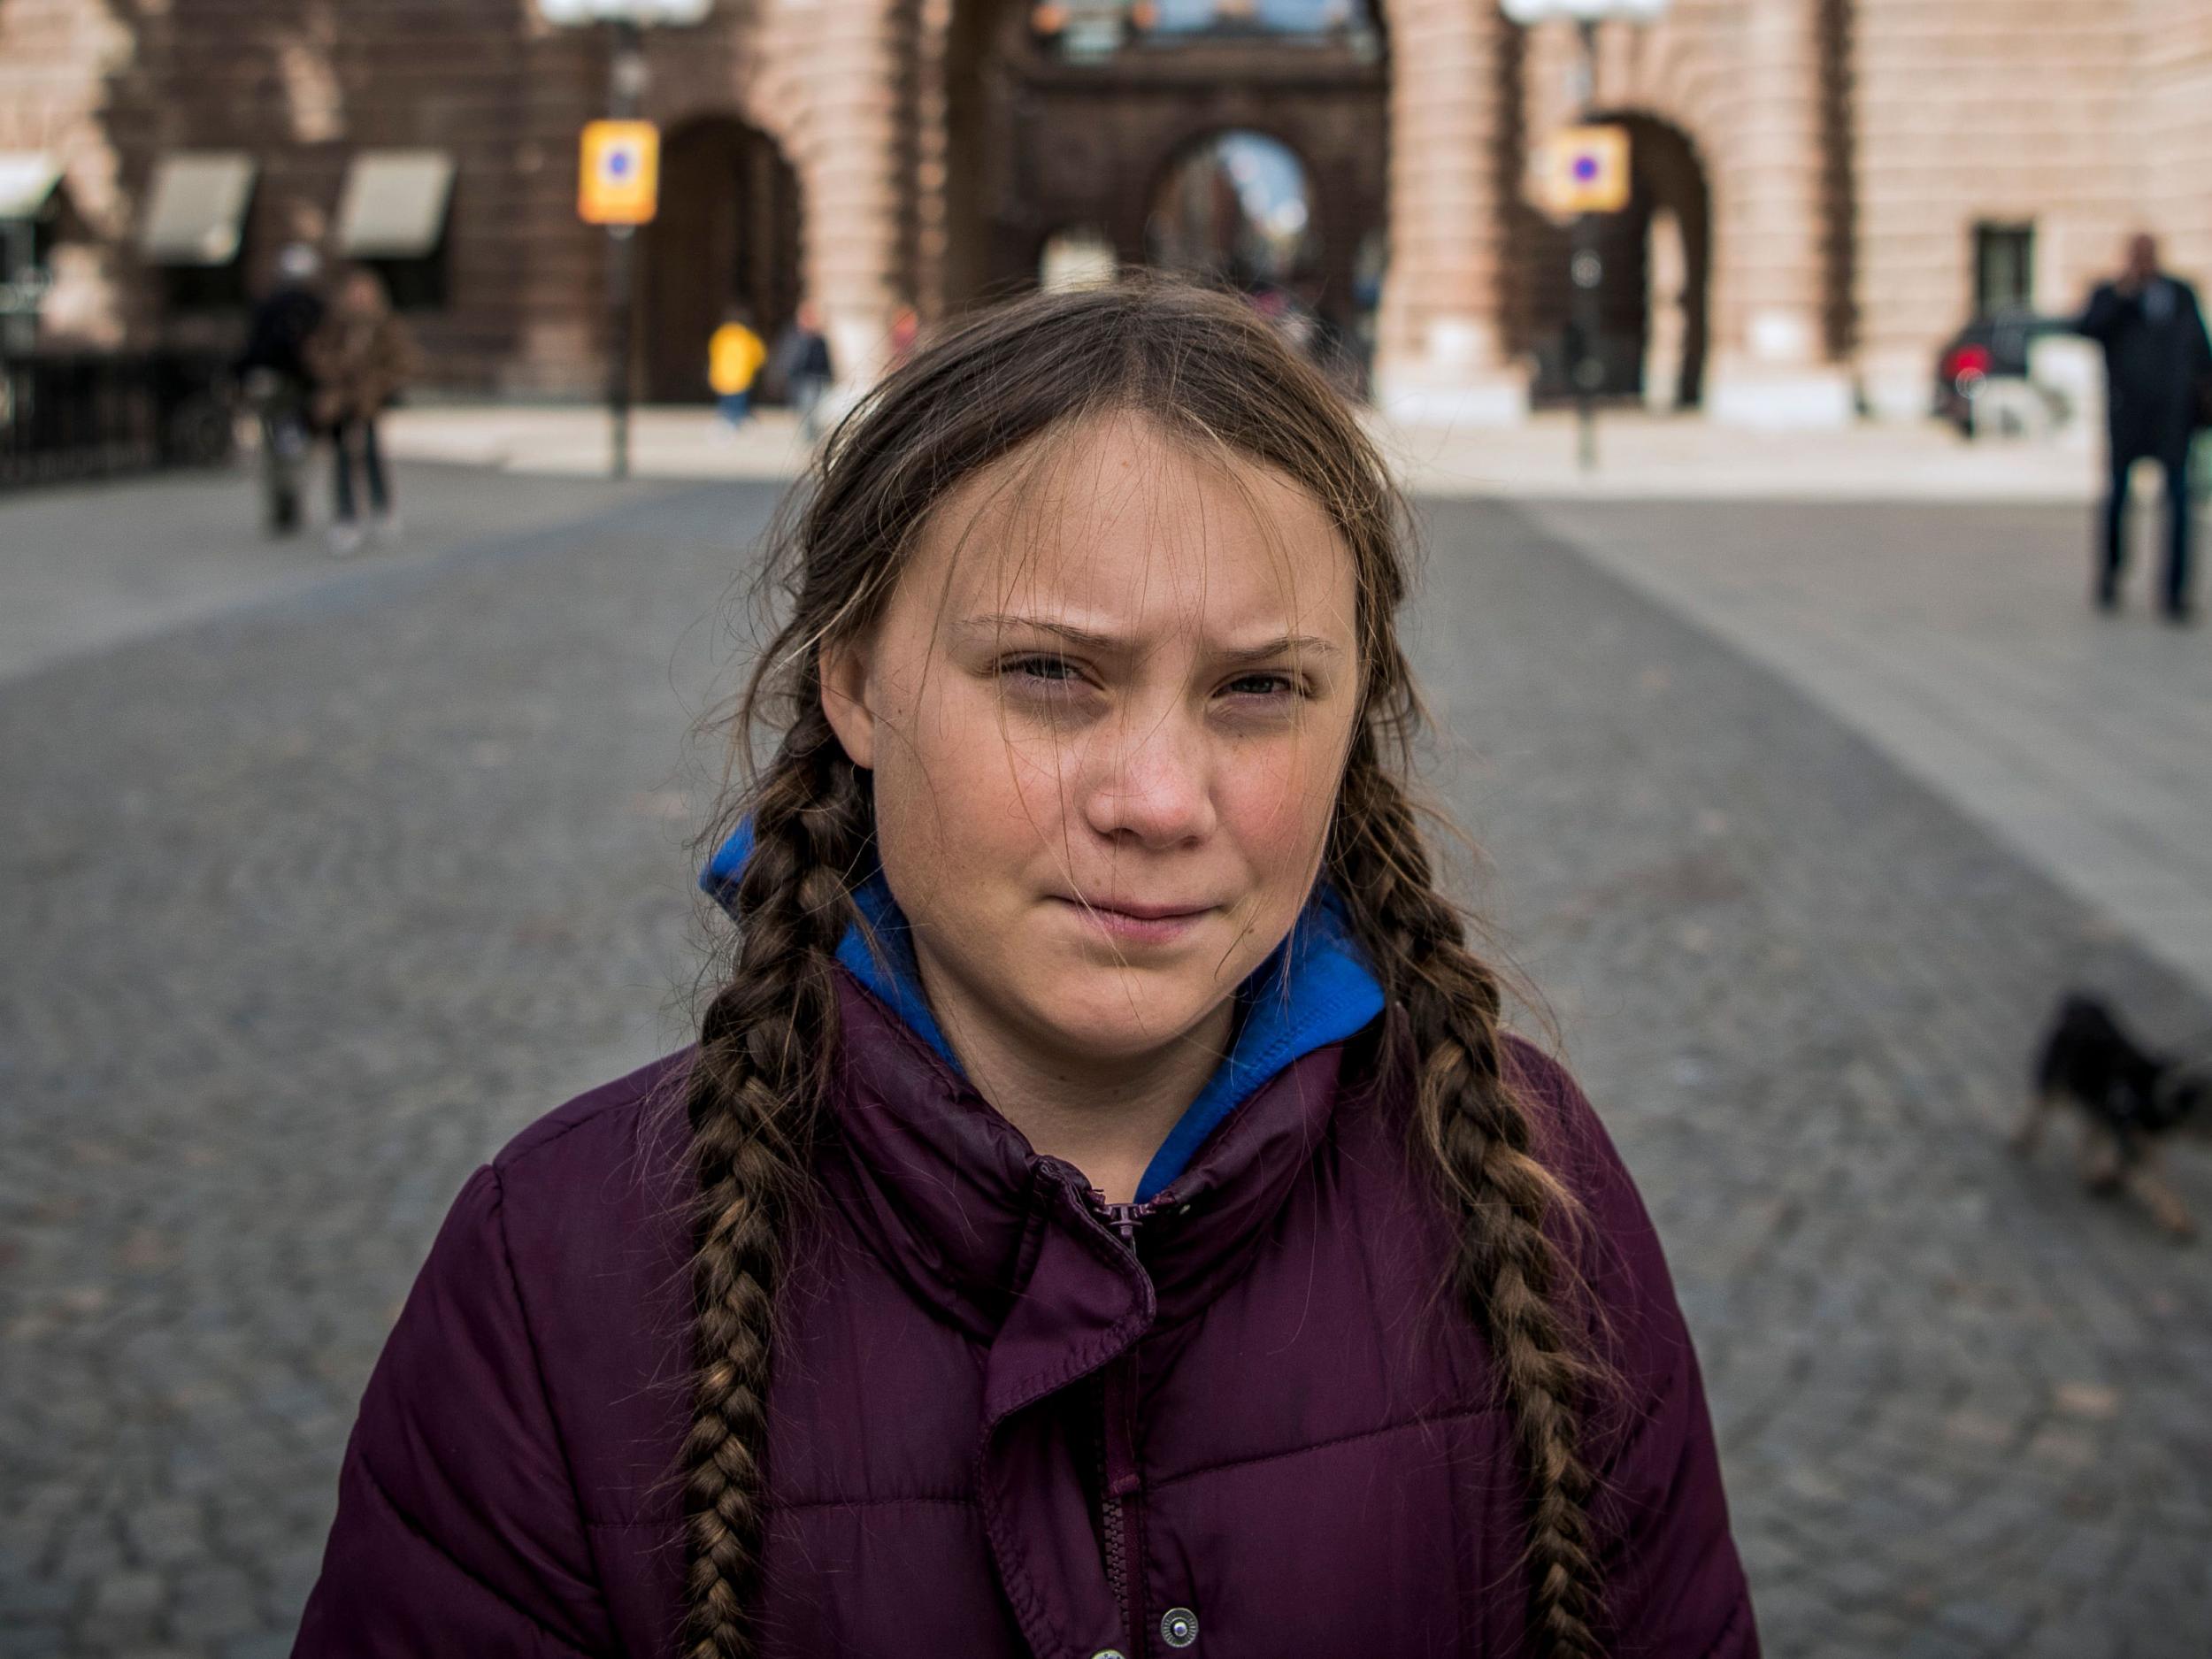 'You have stolen my dreams and my childhood with your empty words,' Greta Thunberg told world leaders